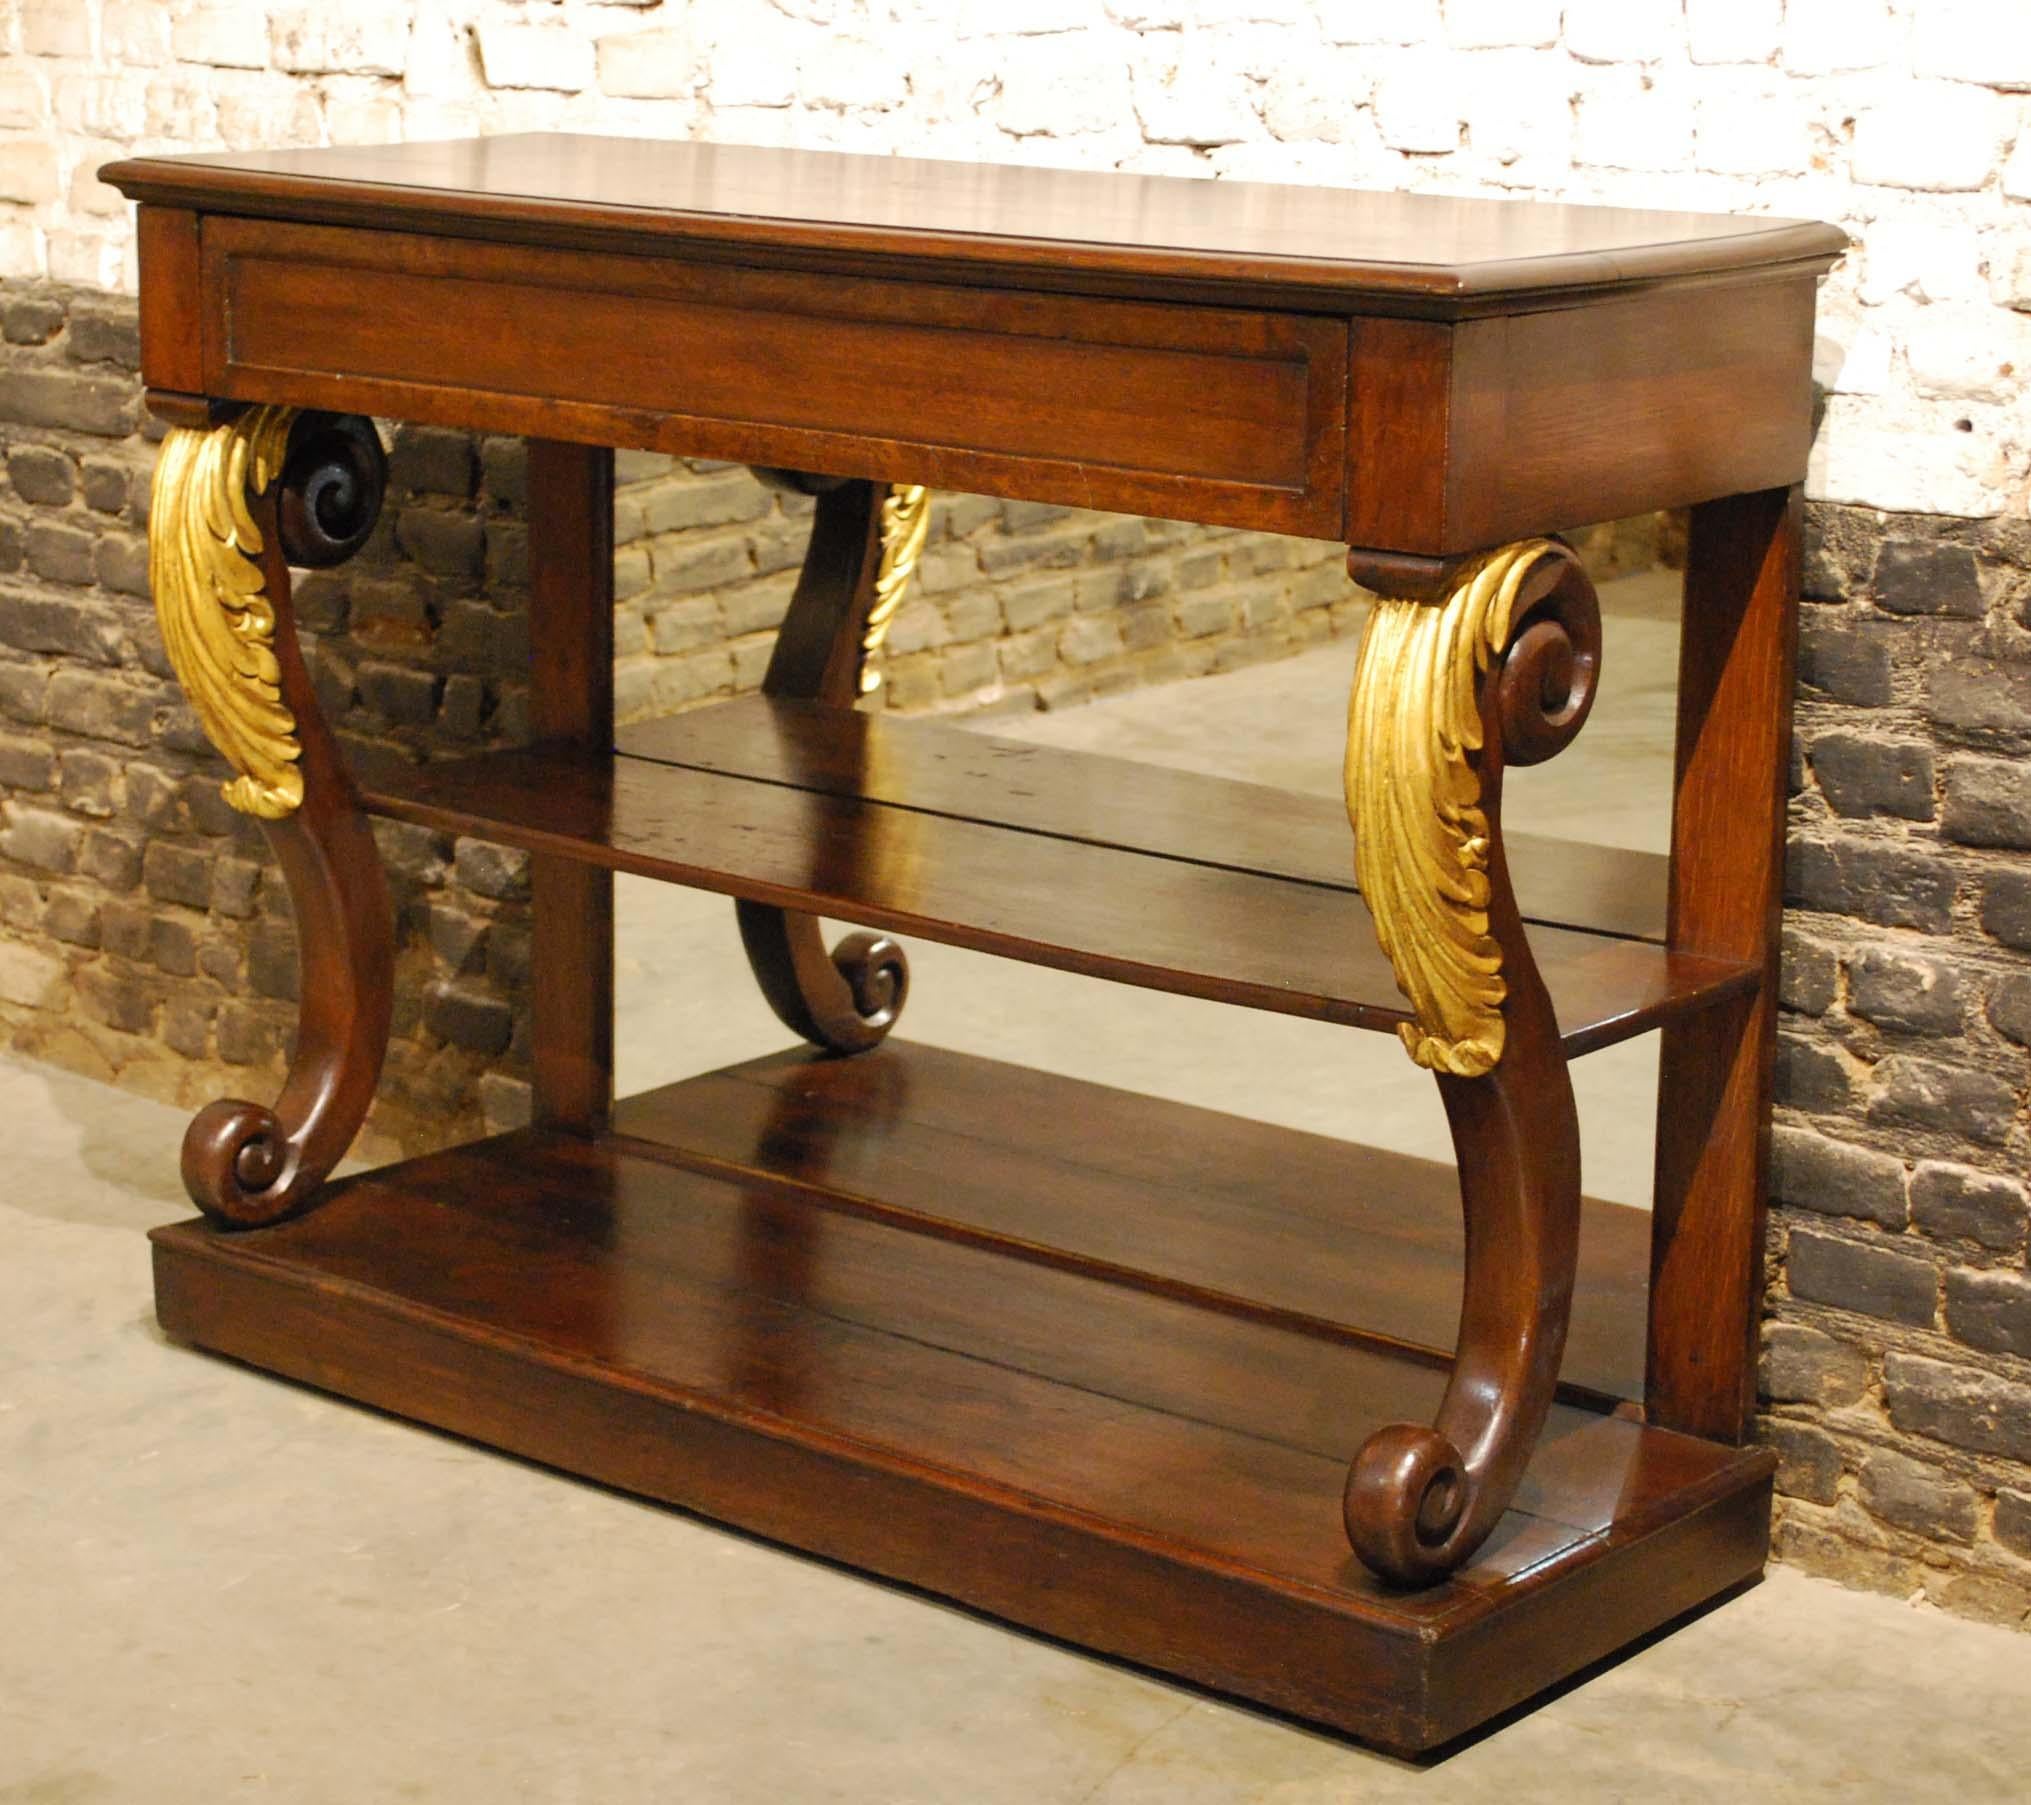 This elegant Empire sideboard was made in the Netherlands in the early 1800s and is also known as trumeau.
It was made in the finest quality watered oak and has a beautiful crossband bur walnut veneer surrounding the drawer. The S-shaped front legs